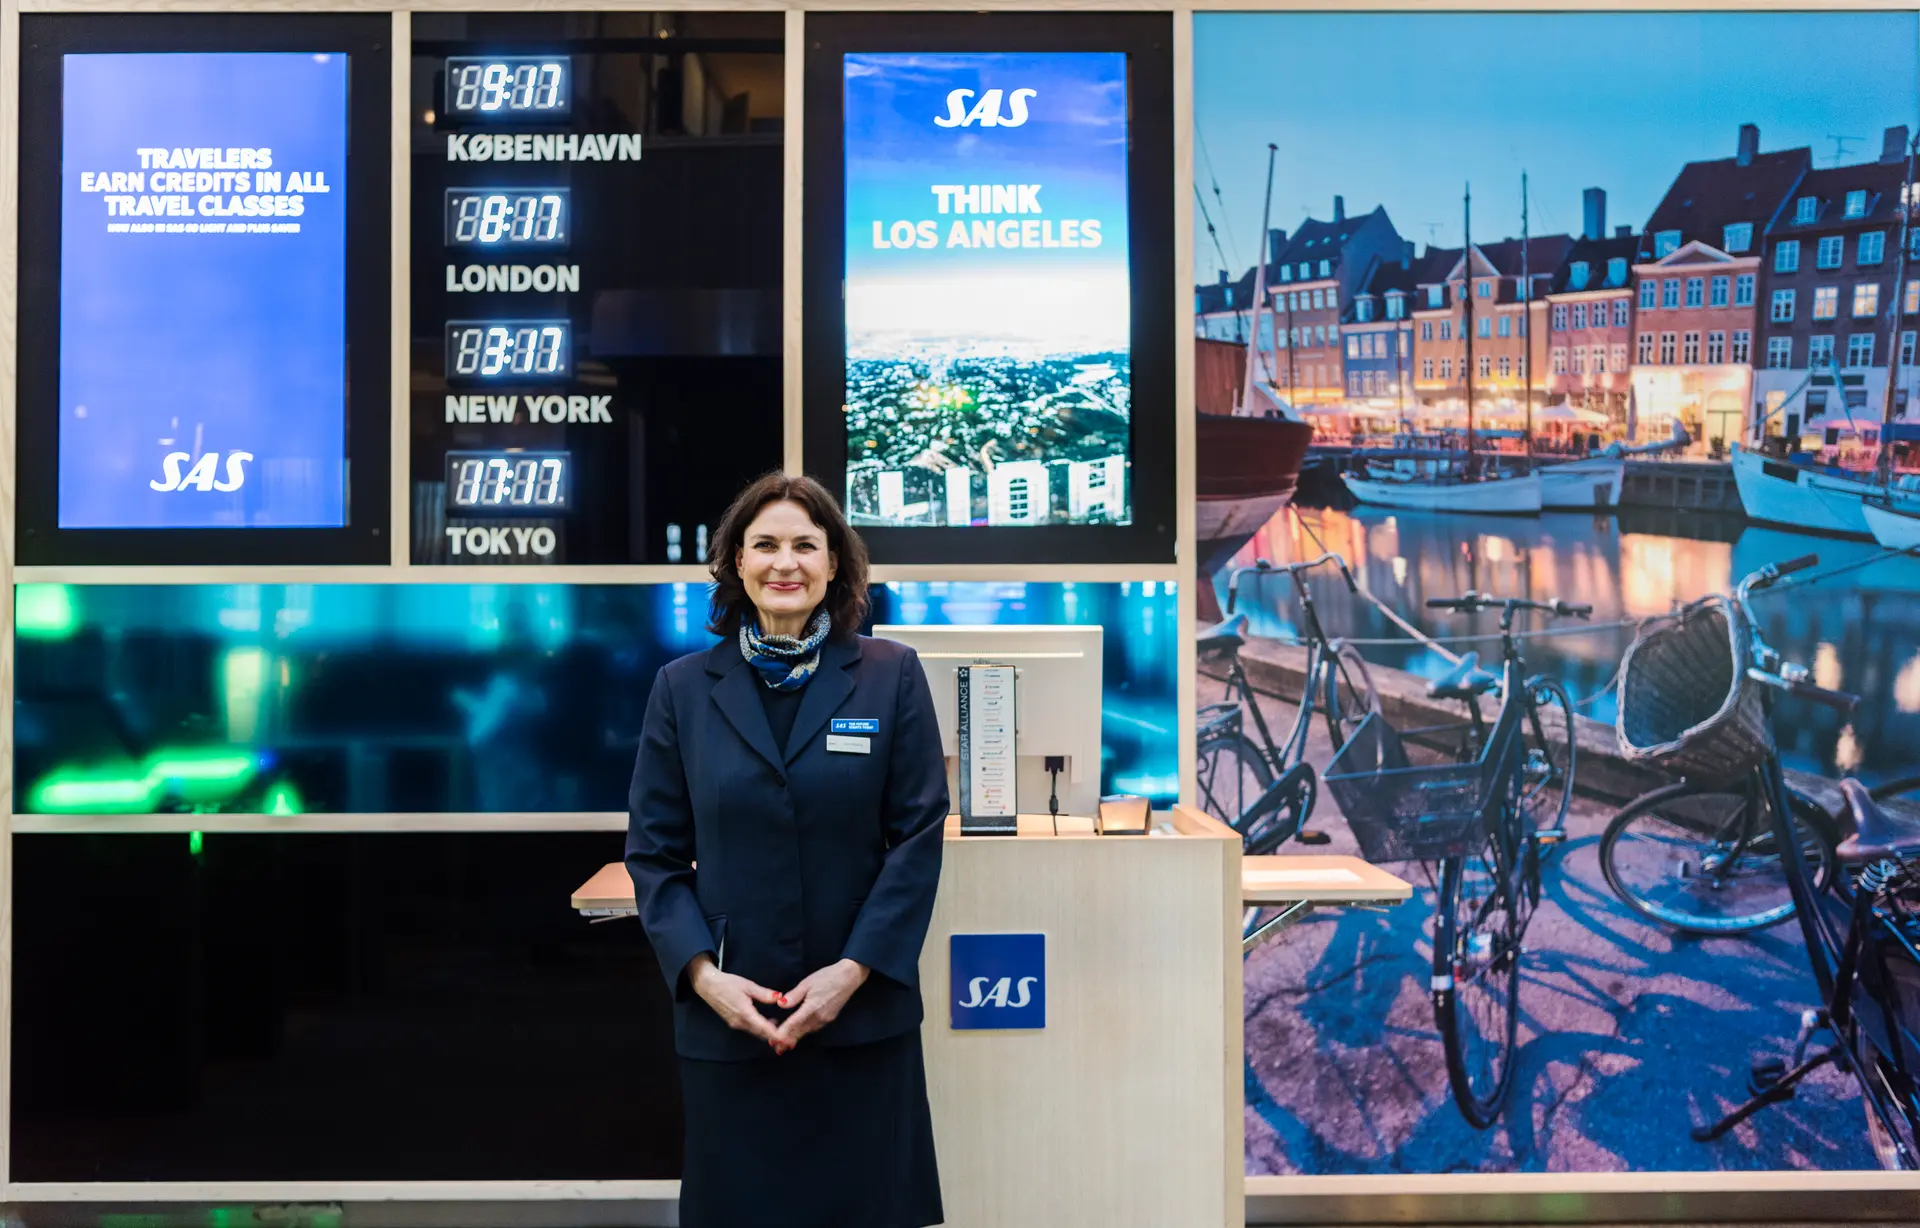 Airline review Airport experience - SAS - 1